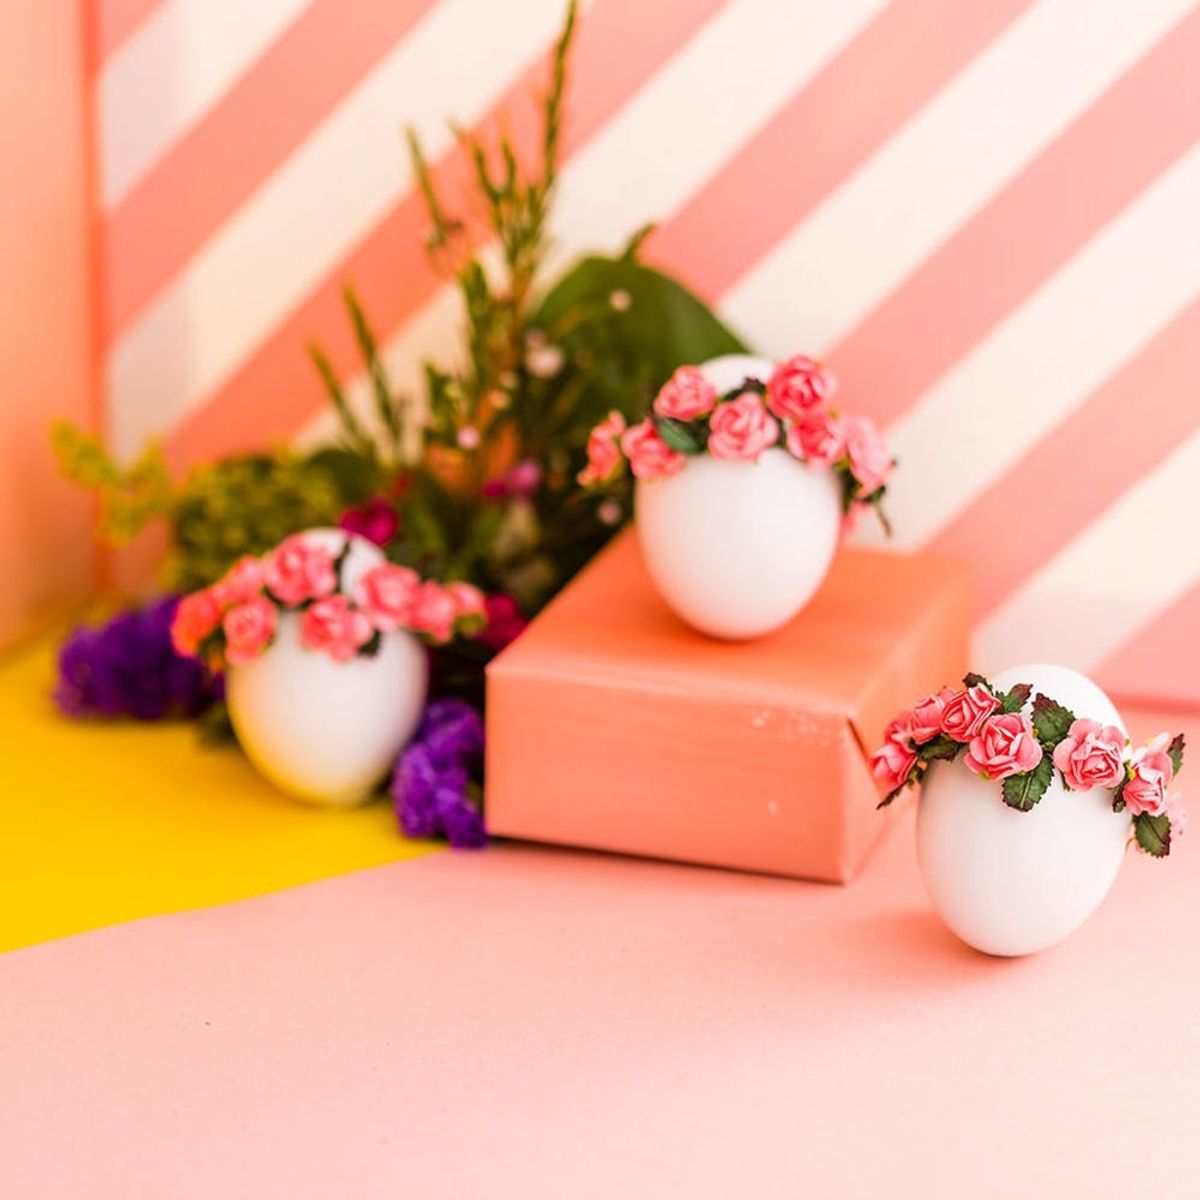 Let Your Easter Eggs Join the Party With Mini DIY Floral Crowns